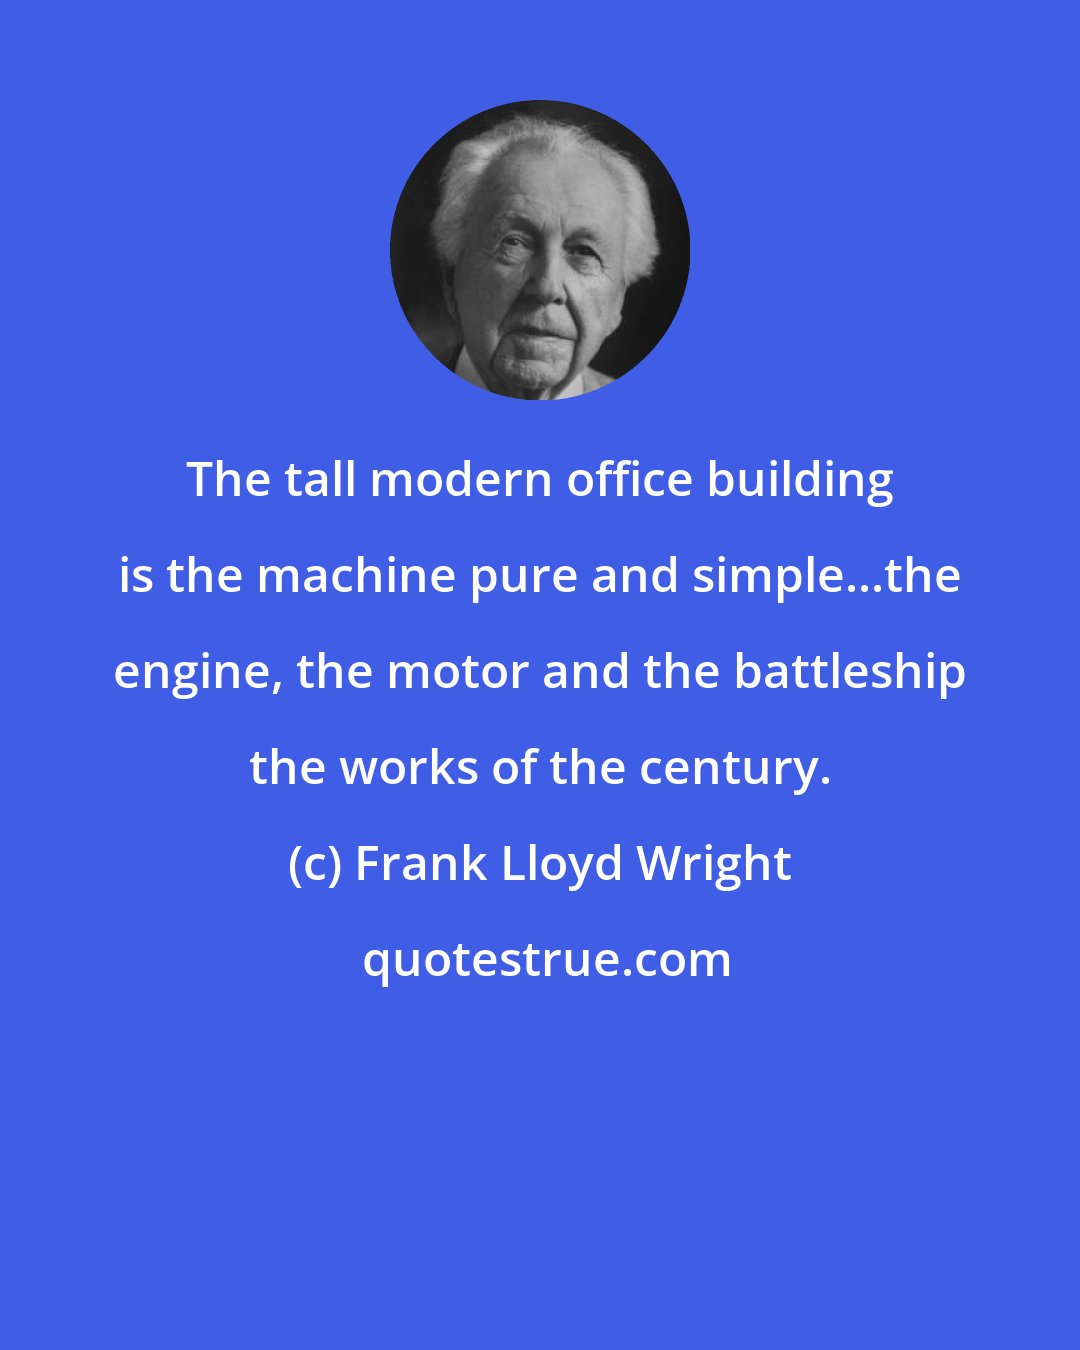 Frank Lloyd Wright: The tall modern office building is the machine pure and simple...the engine, the motor and the battleship the works of the century.